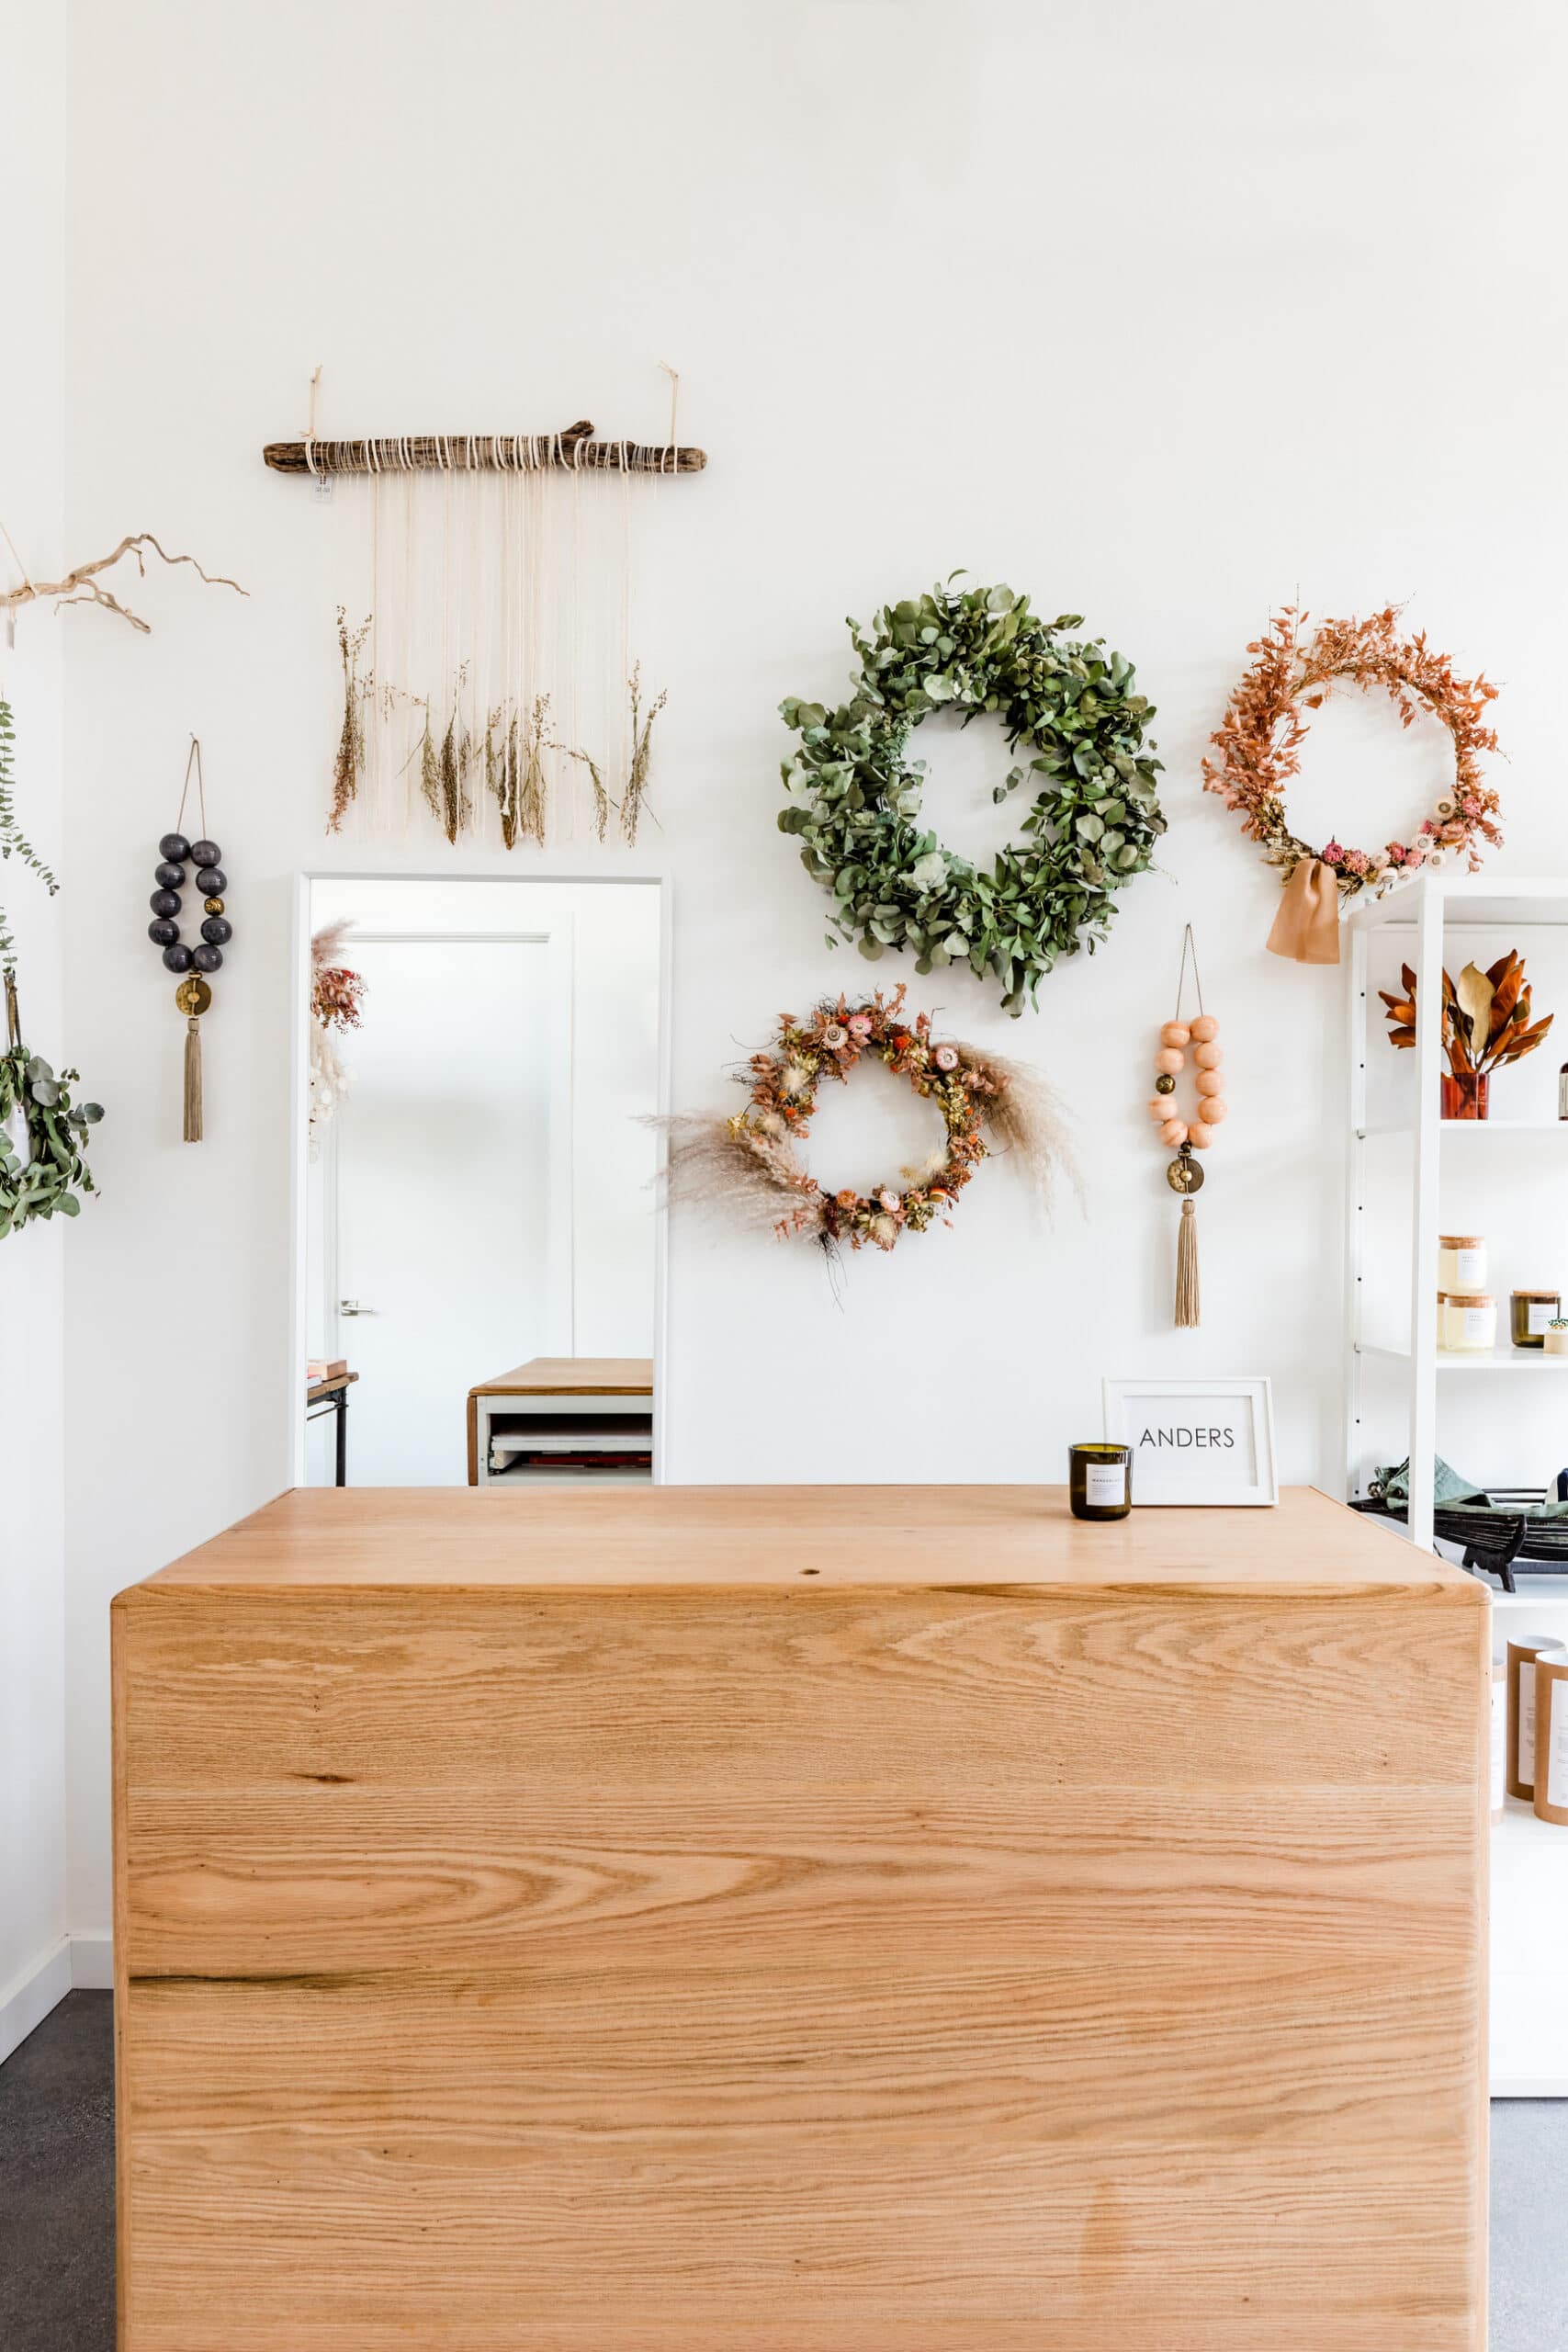 Anders Shop in Ballard features local and sustainable goods | seattle city guide on coco kelley